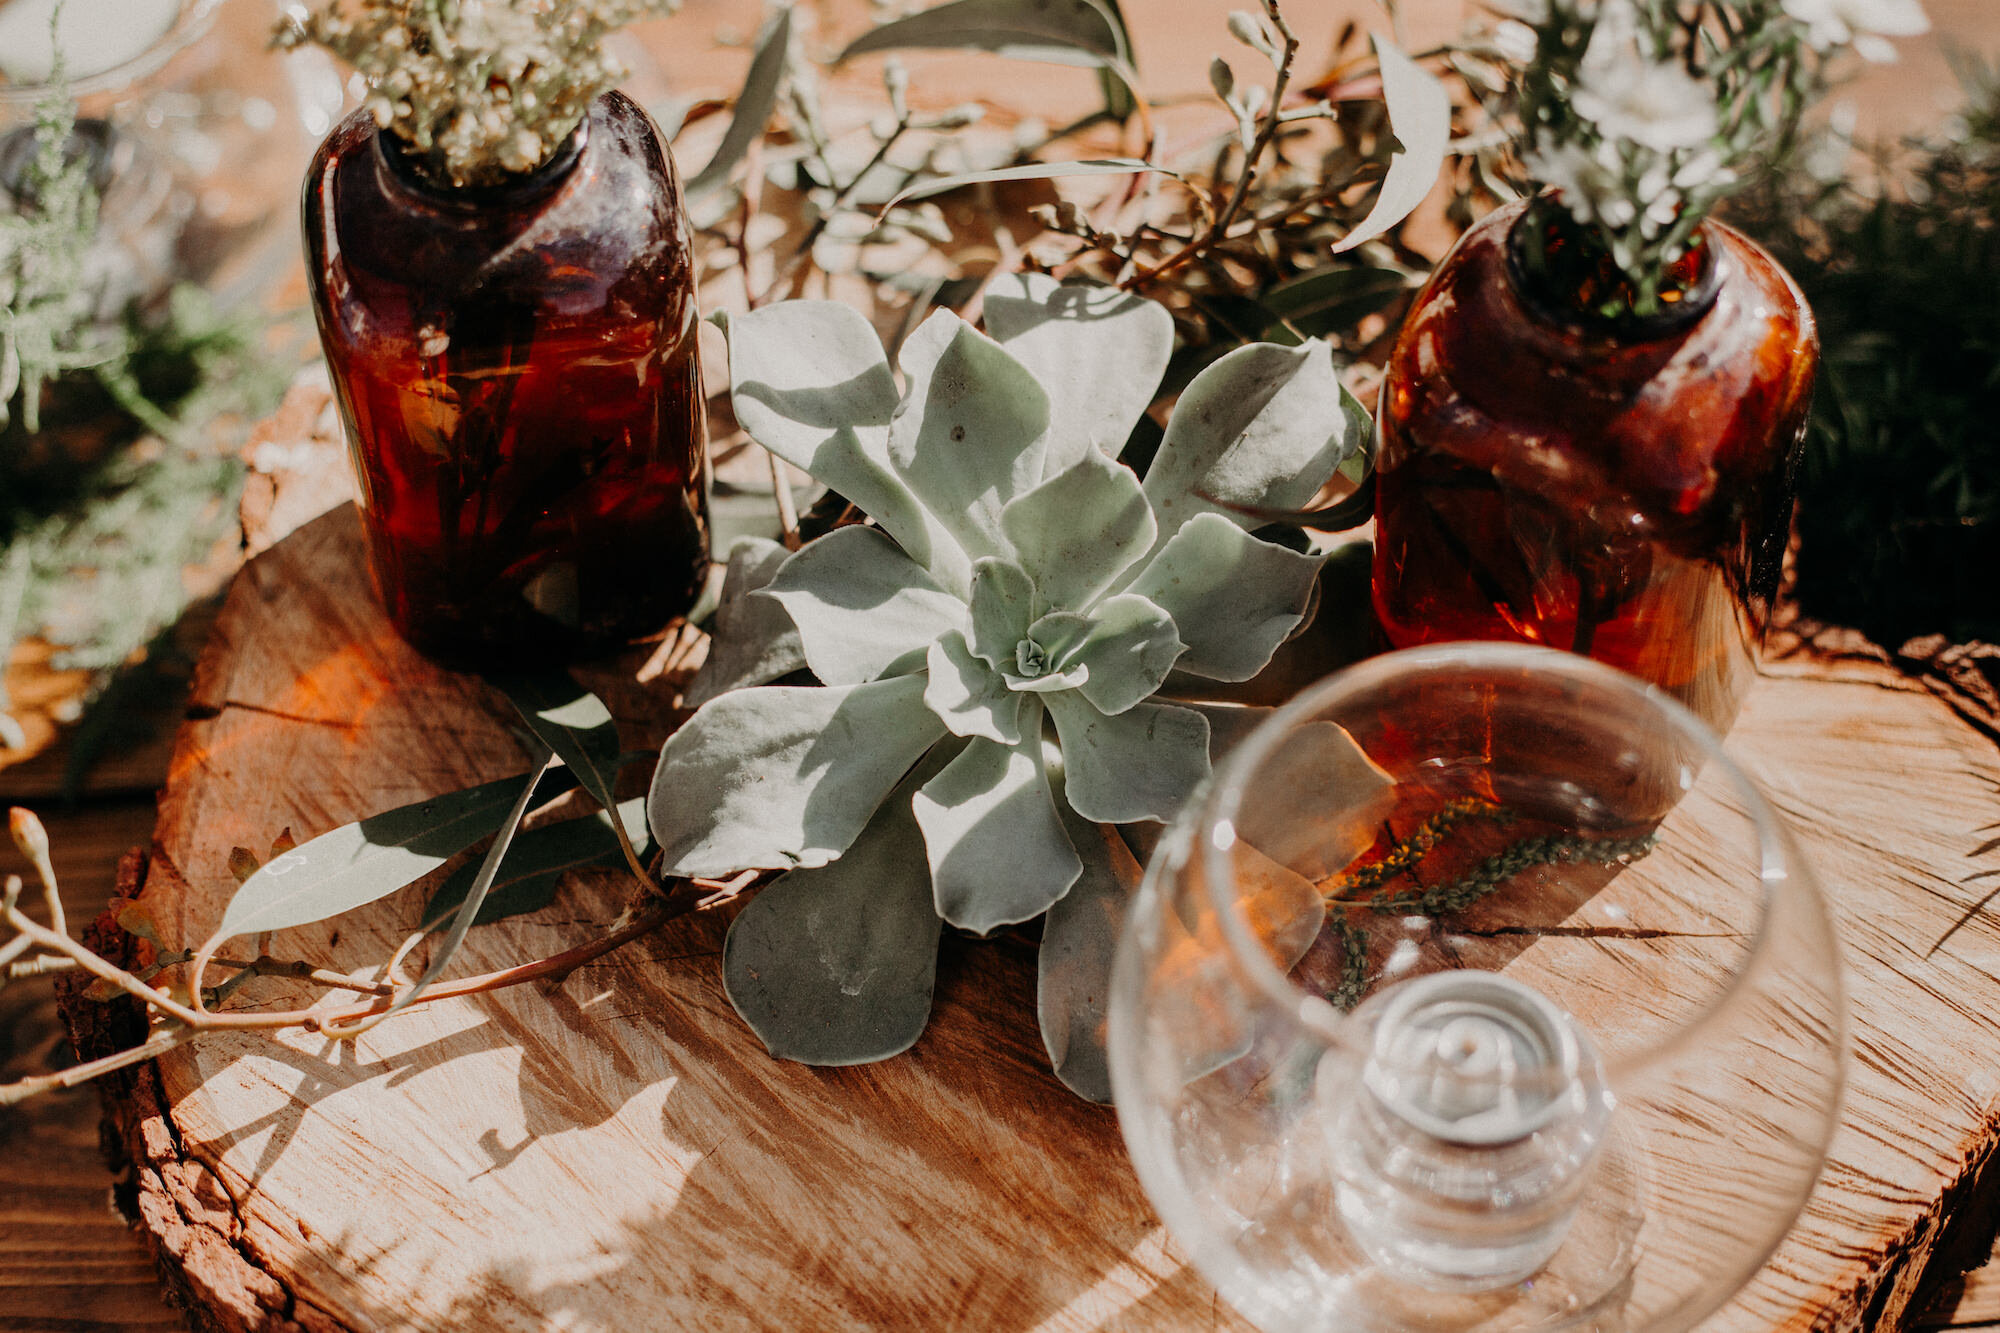 sustainable wooden slab wedding centerpiece with succulents and reusable glassware filled with plants contribute to the zero waste wedding